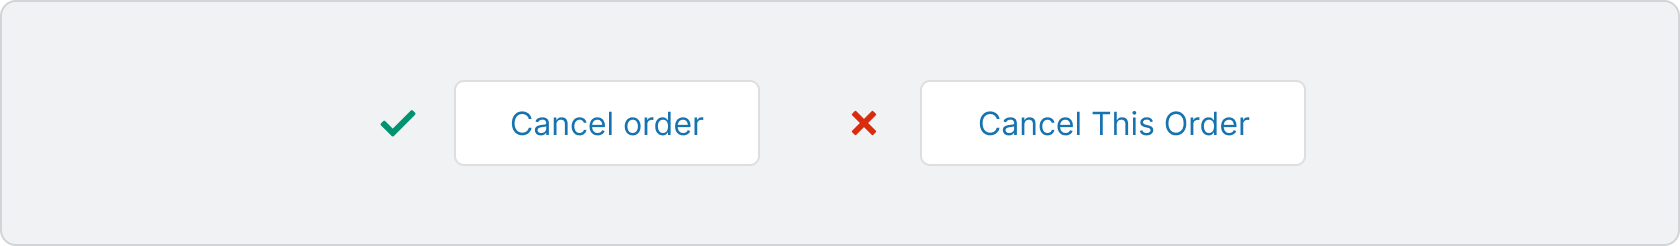 The example of the button that follows the guidelines says "Cancel order", written in sentence case. The example of the button that doesn't follow the guidelines says "Cancel This Order", written in title case and using "this", which is unnecessary.